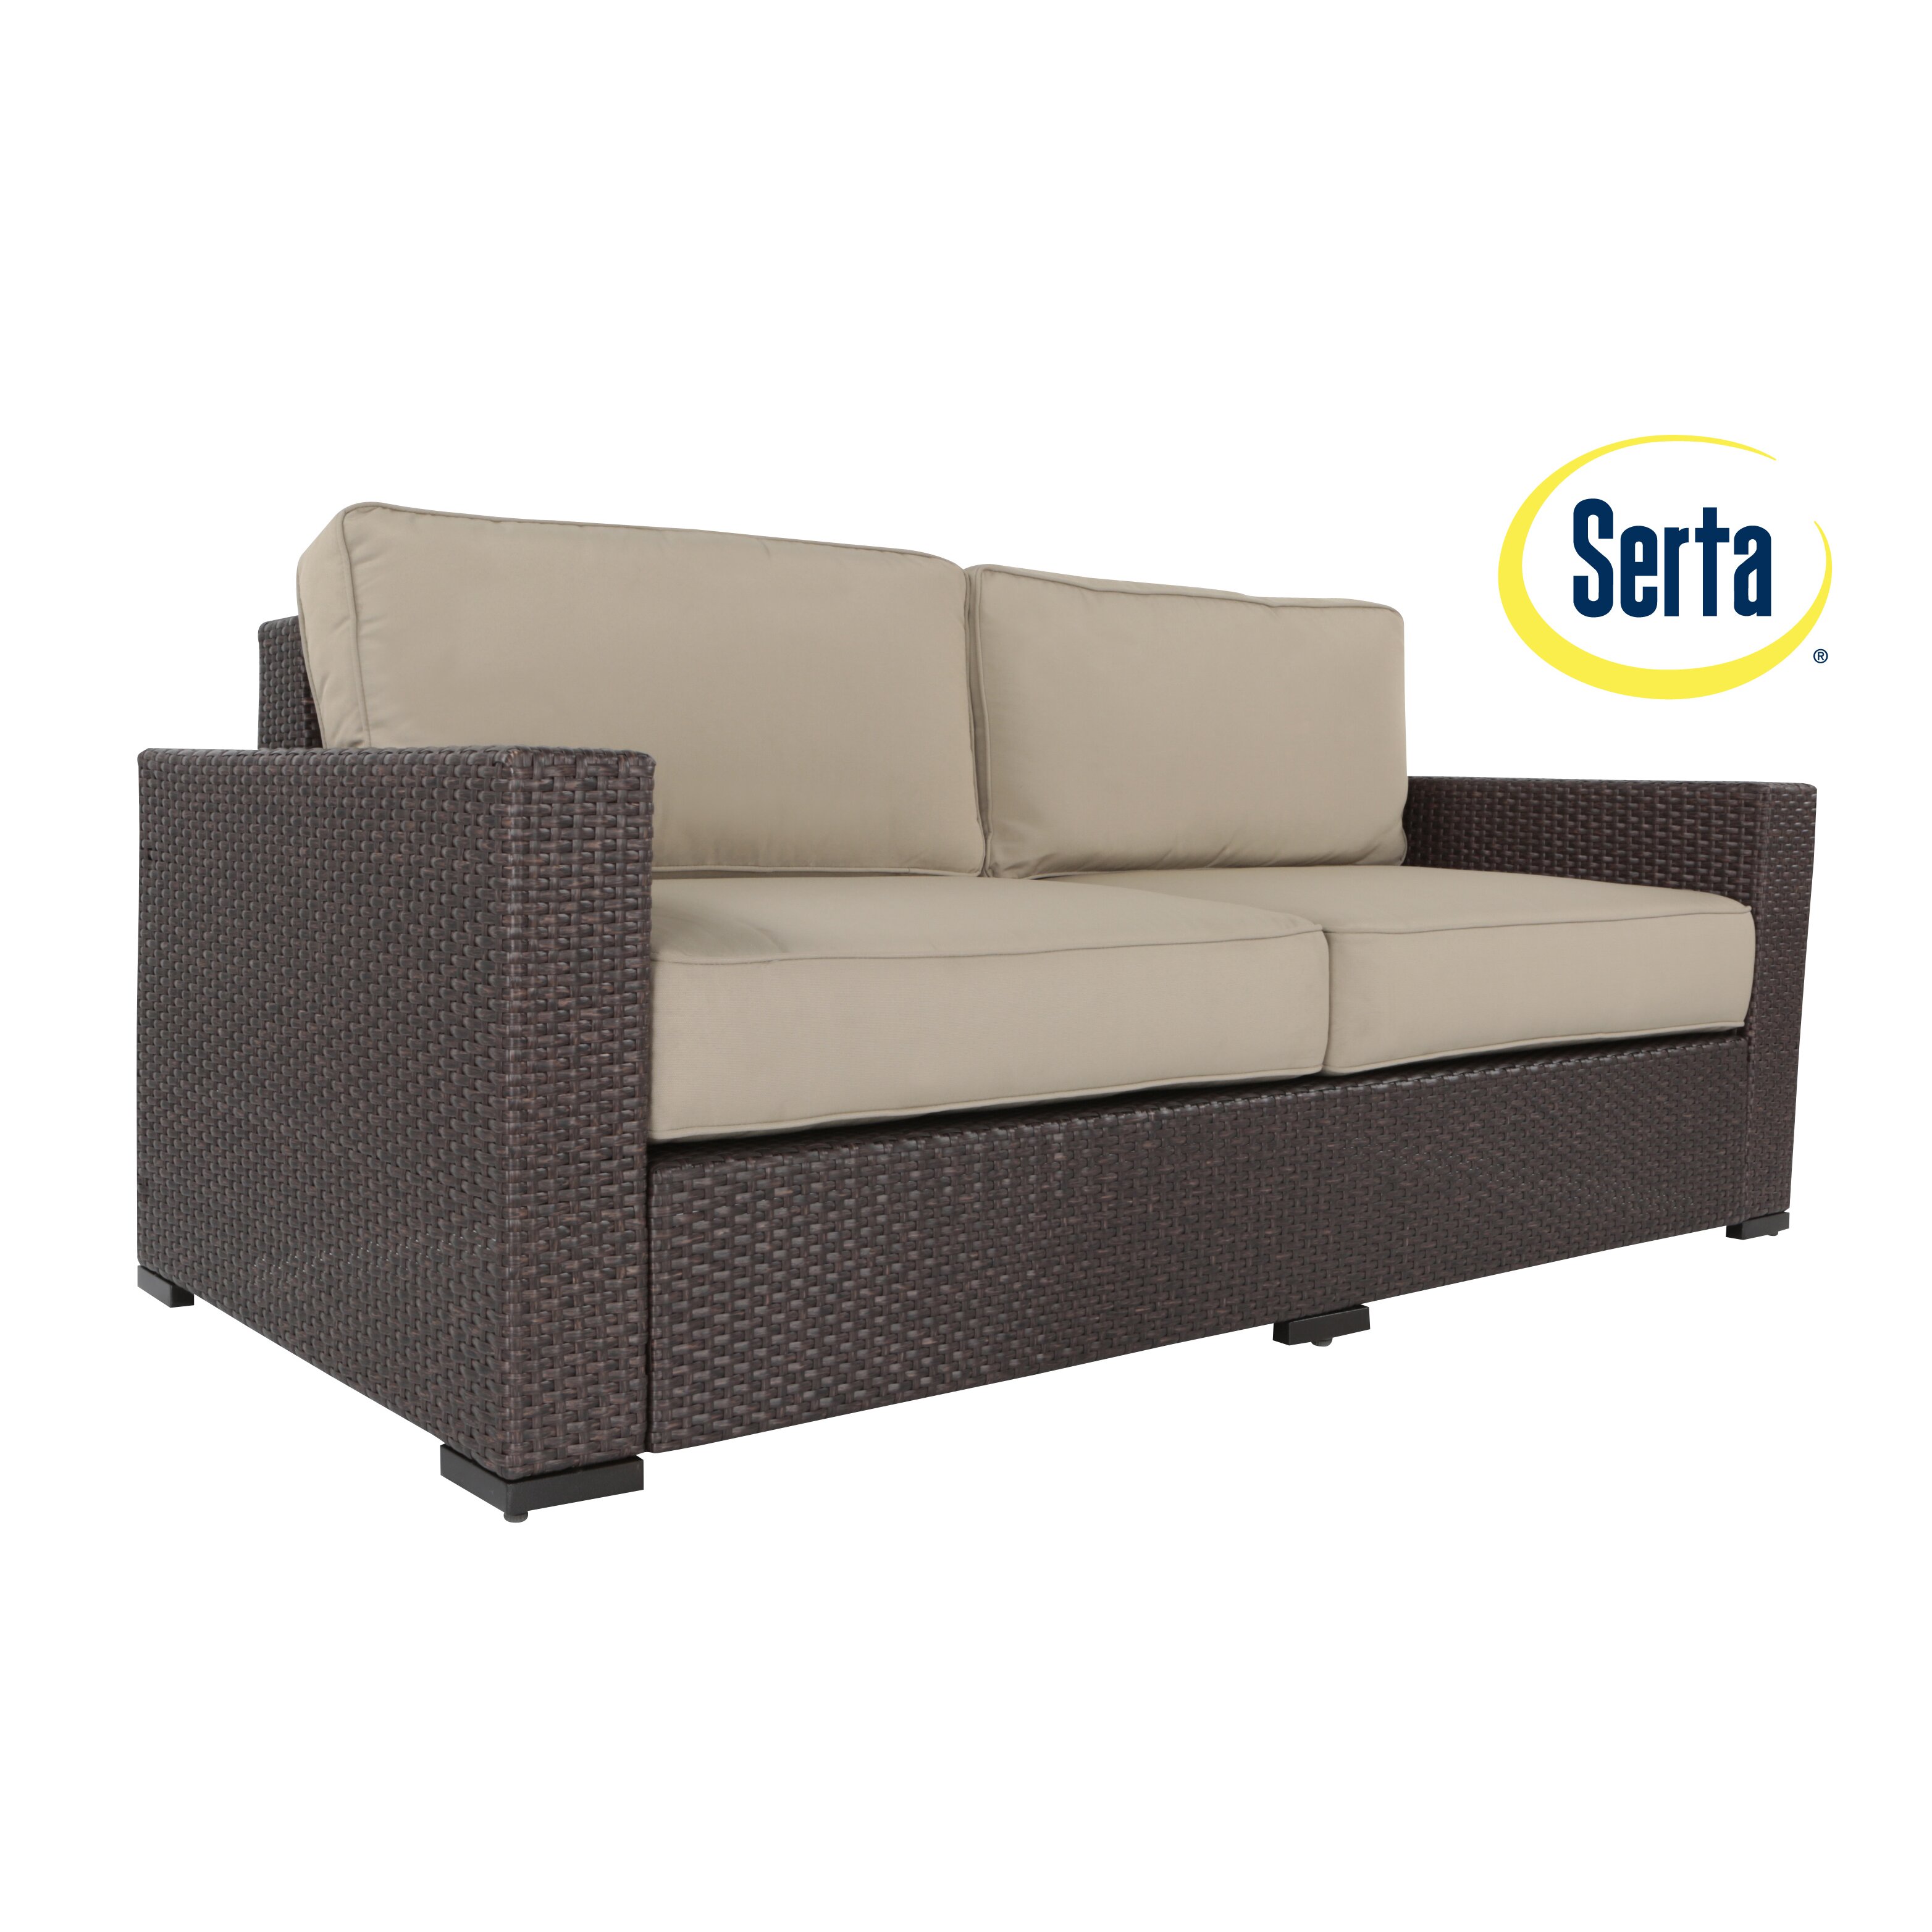 Serta at Home Sterling Falls Outdoor Sofa with Cushions